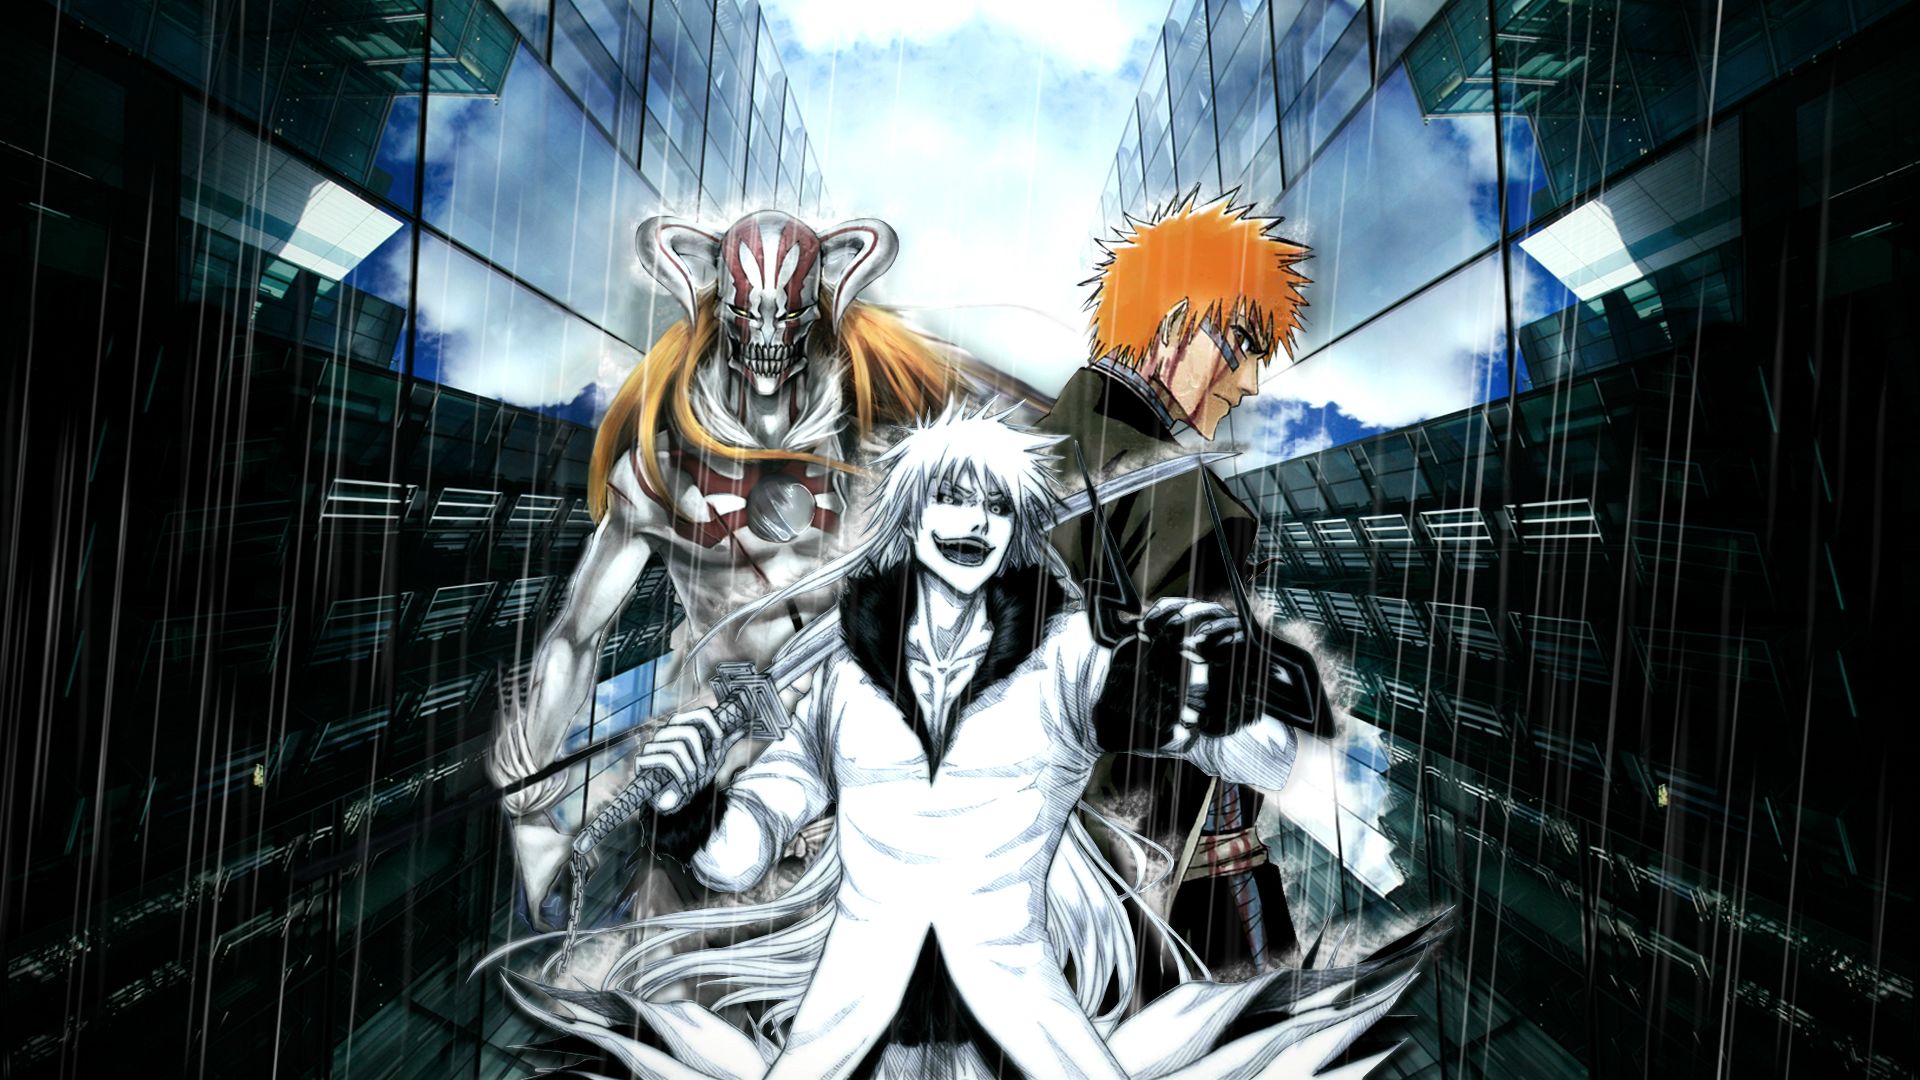 Bleach Anime Image Wallpaper With Resolution